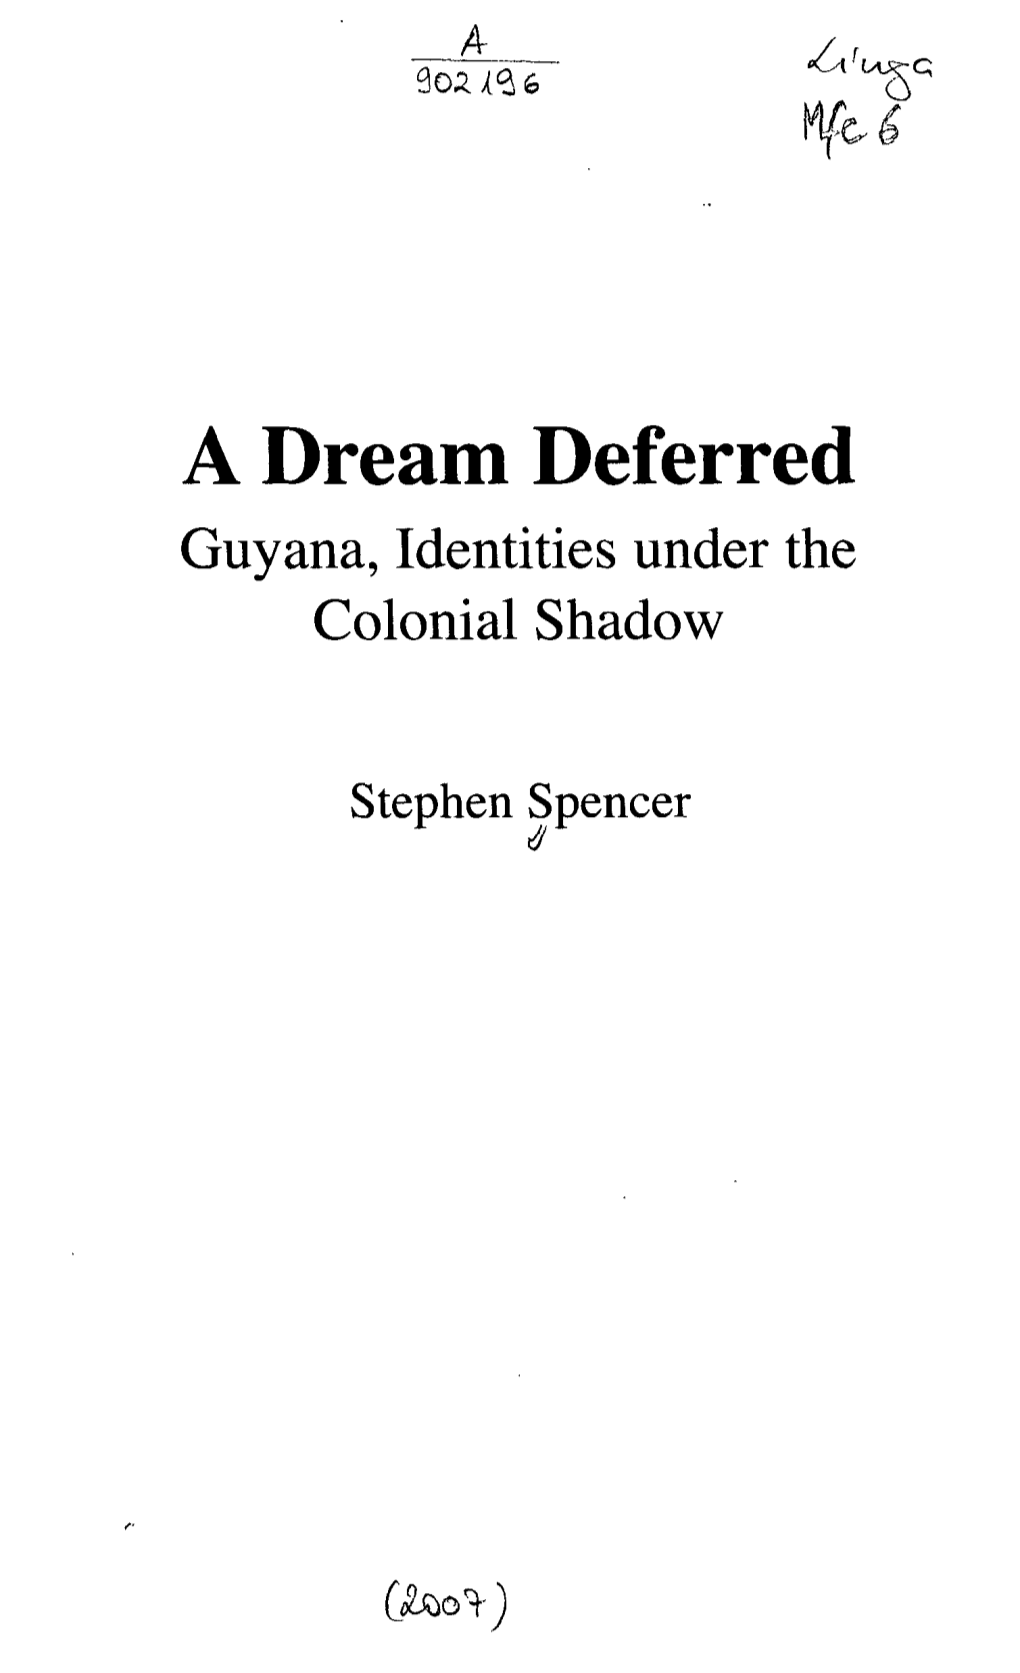 A Dream Deferred Guyana, Identities Under the Colonial Shadow